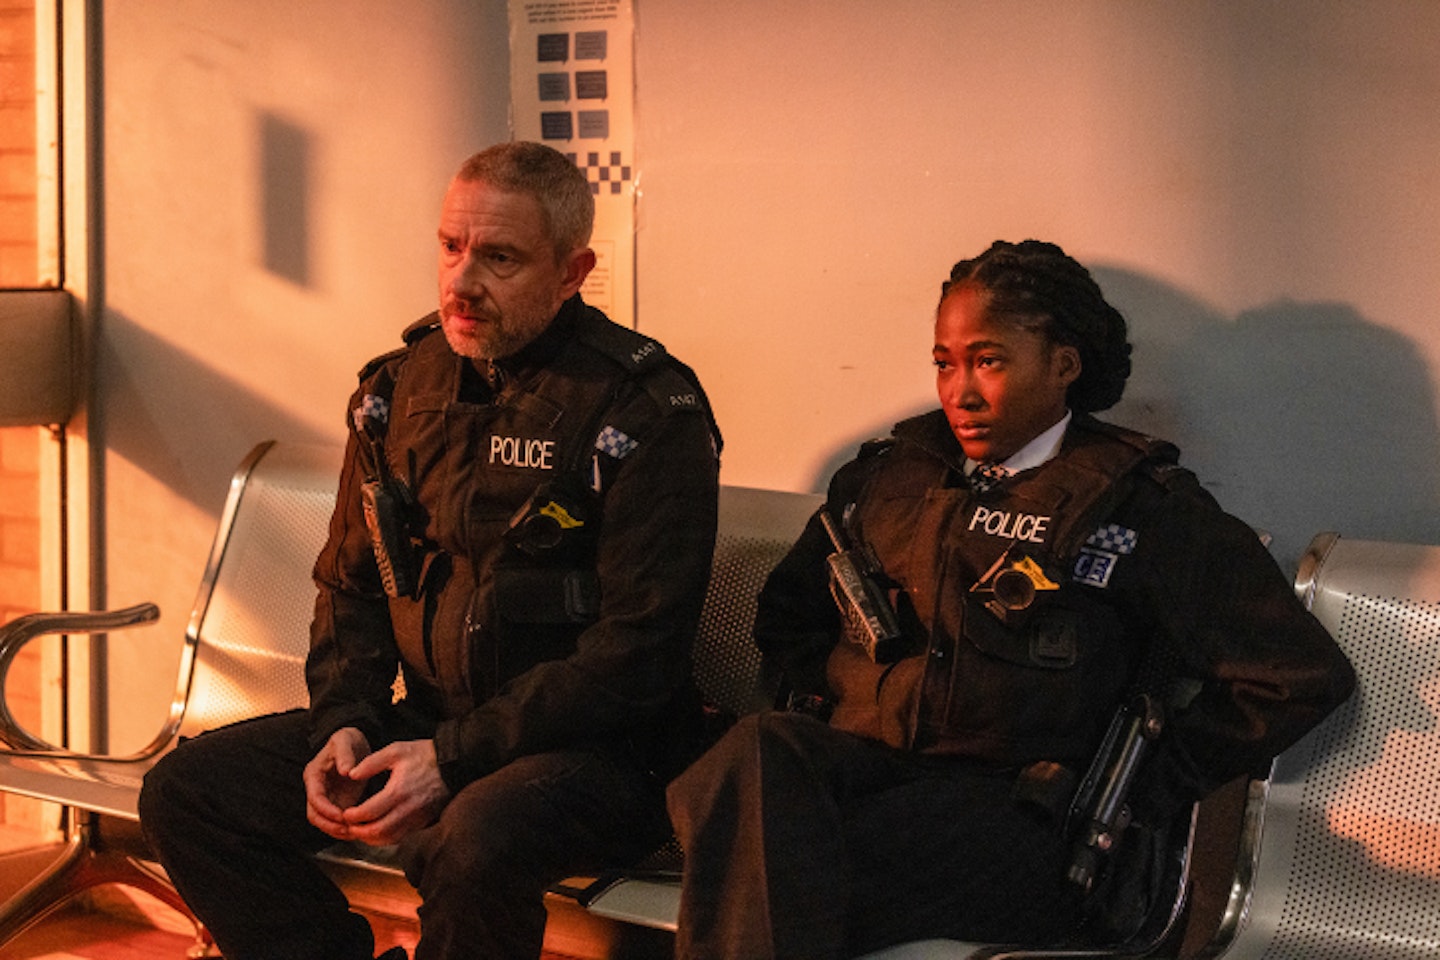 Martin Freeman and Adelayo Adedayo as police officers in The Responder